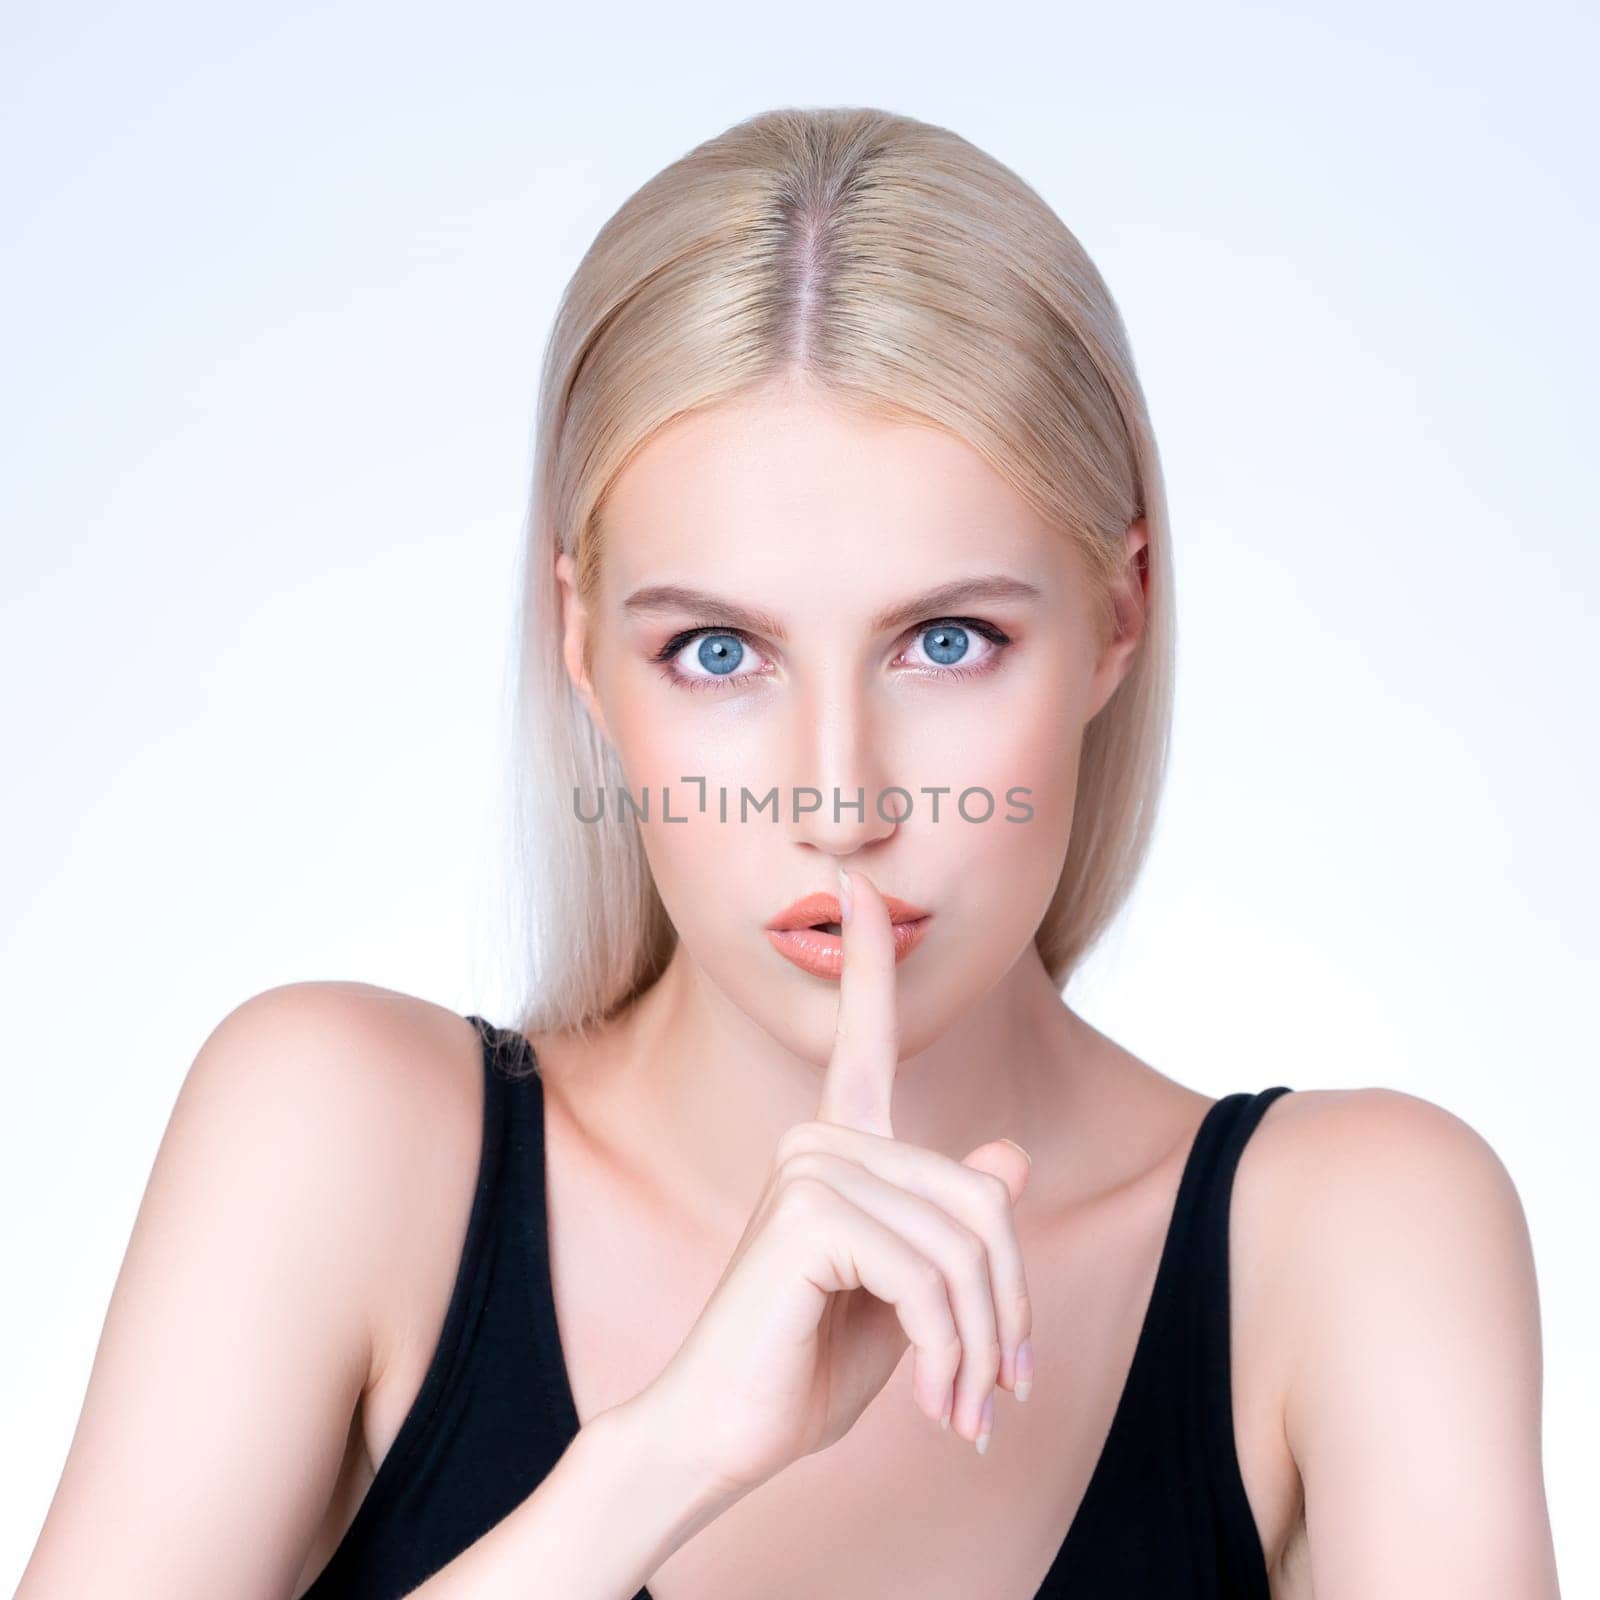 Closeup personable beautiful woman portrait with perfect smooth clean skin and natural makeup portrait in isolated background. Hand gesture with expressive facial expression for beauty model concept.